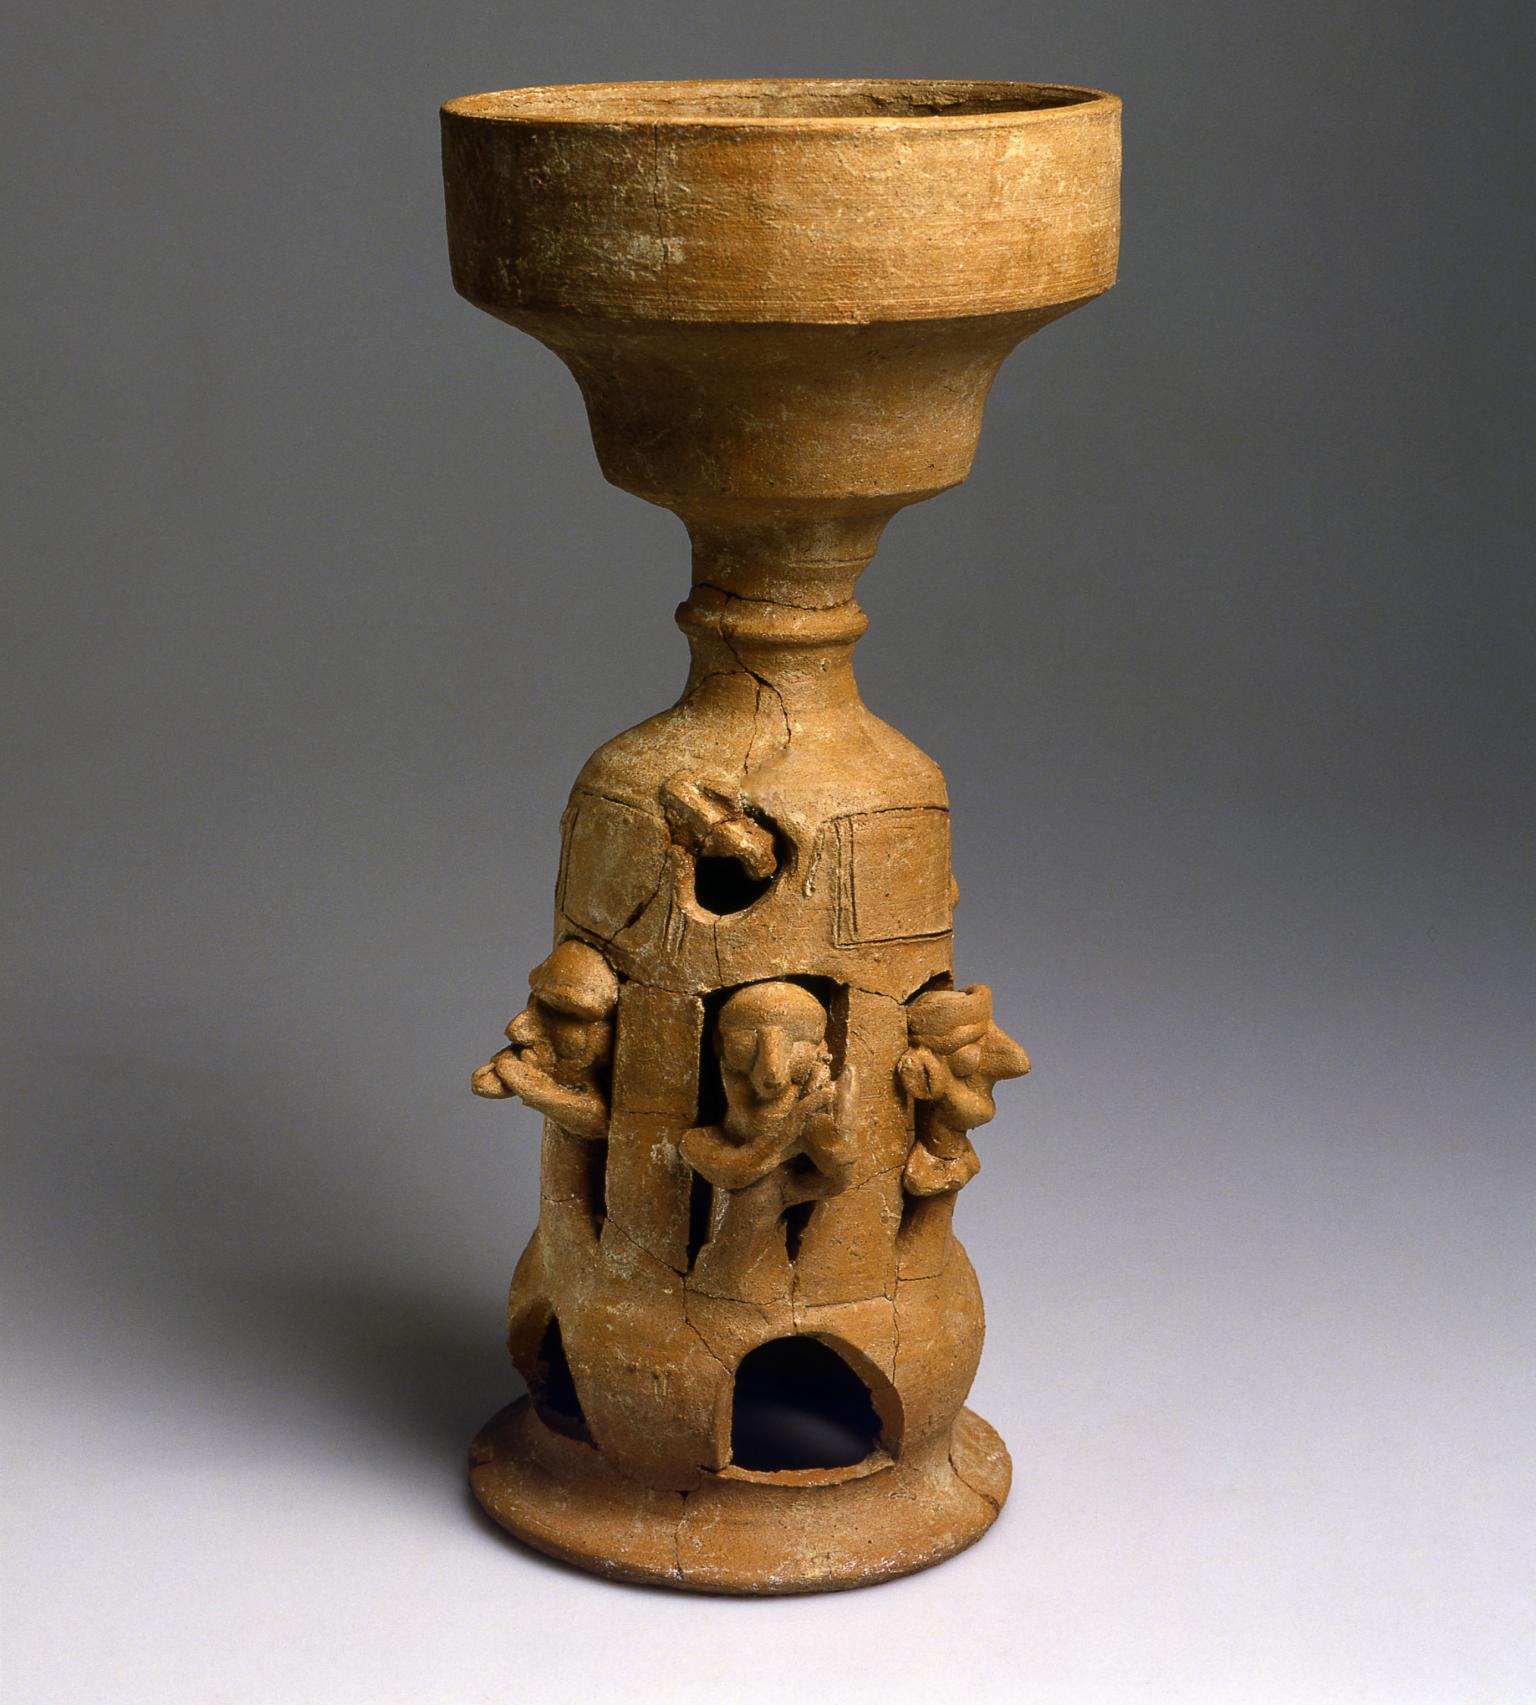 Ceramic stand decorated with carvings of musicians playing instruments.